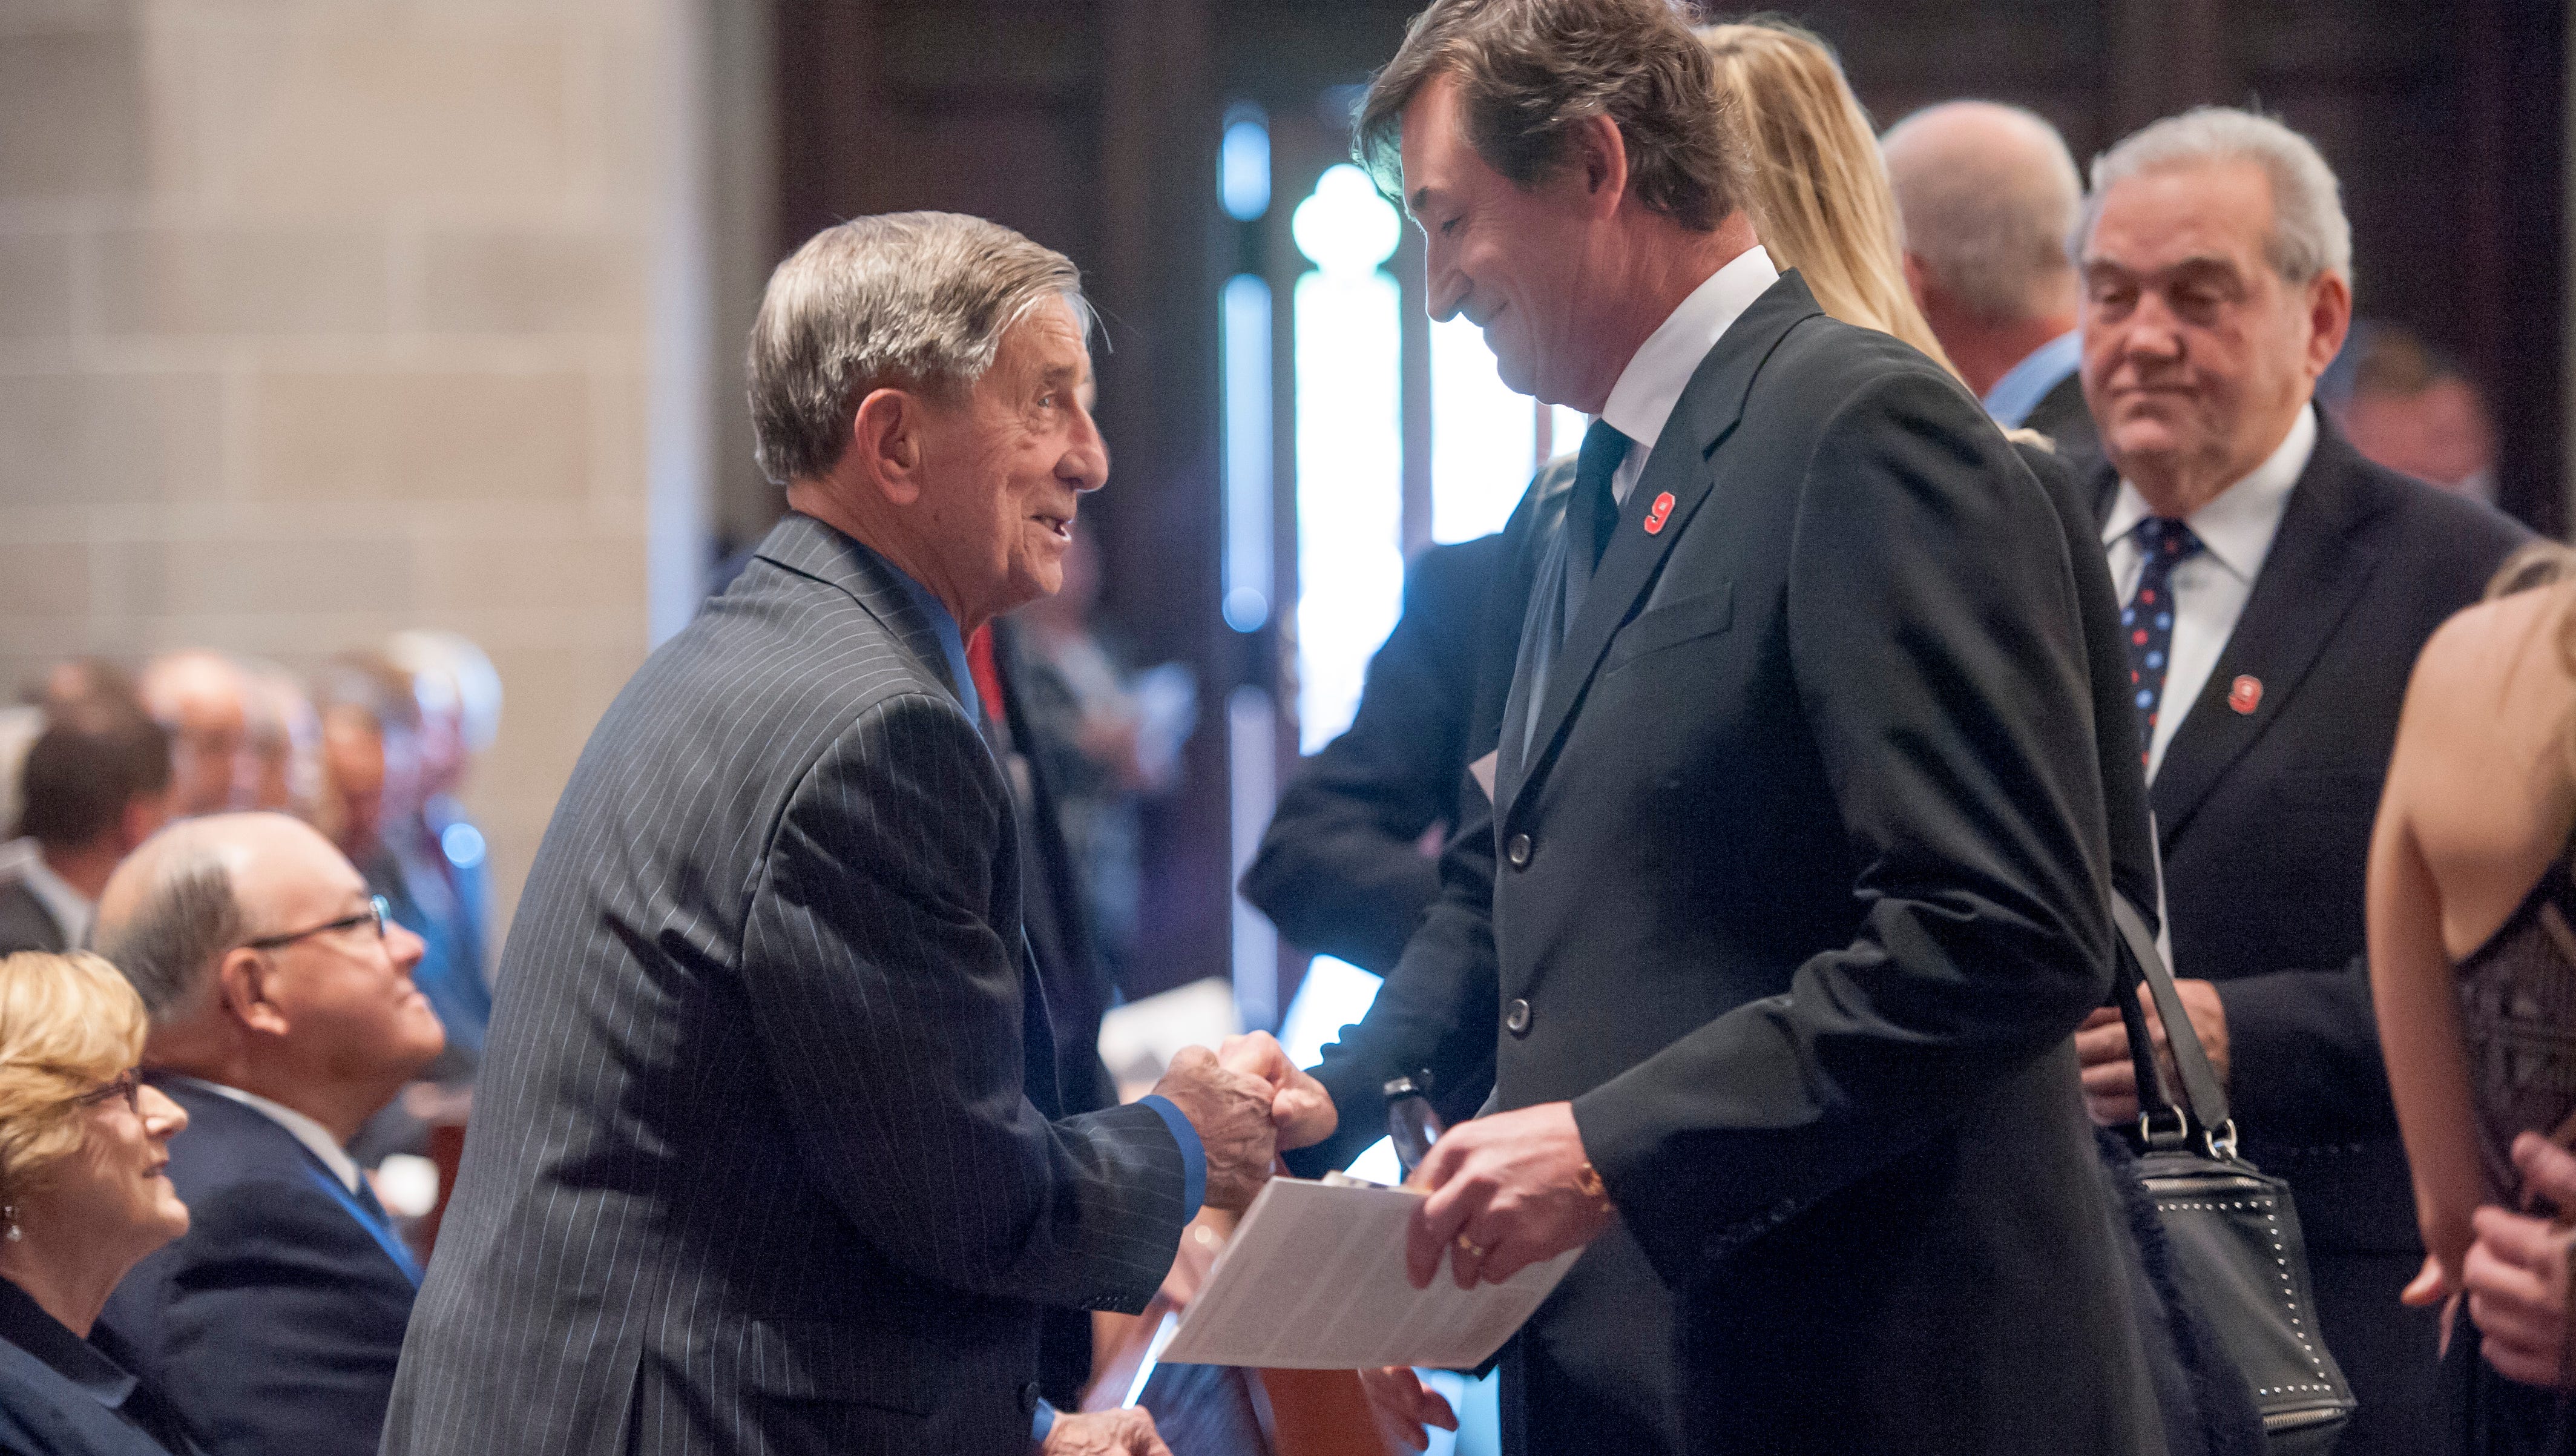 Former Gordie Howe teammate Ted Lindsay, left, and hockey legend Wayne Gretzky chat before the funeral service for Gordie Howe in 2016. Lindsay played with Howe and Sid Abel on the famed "Production Line."